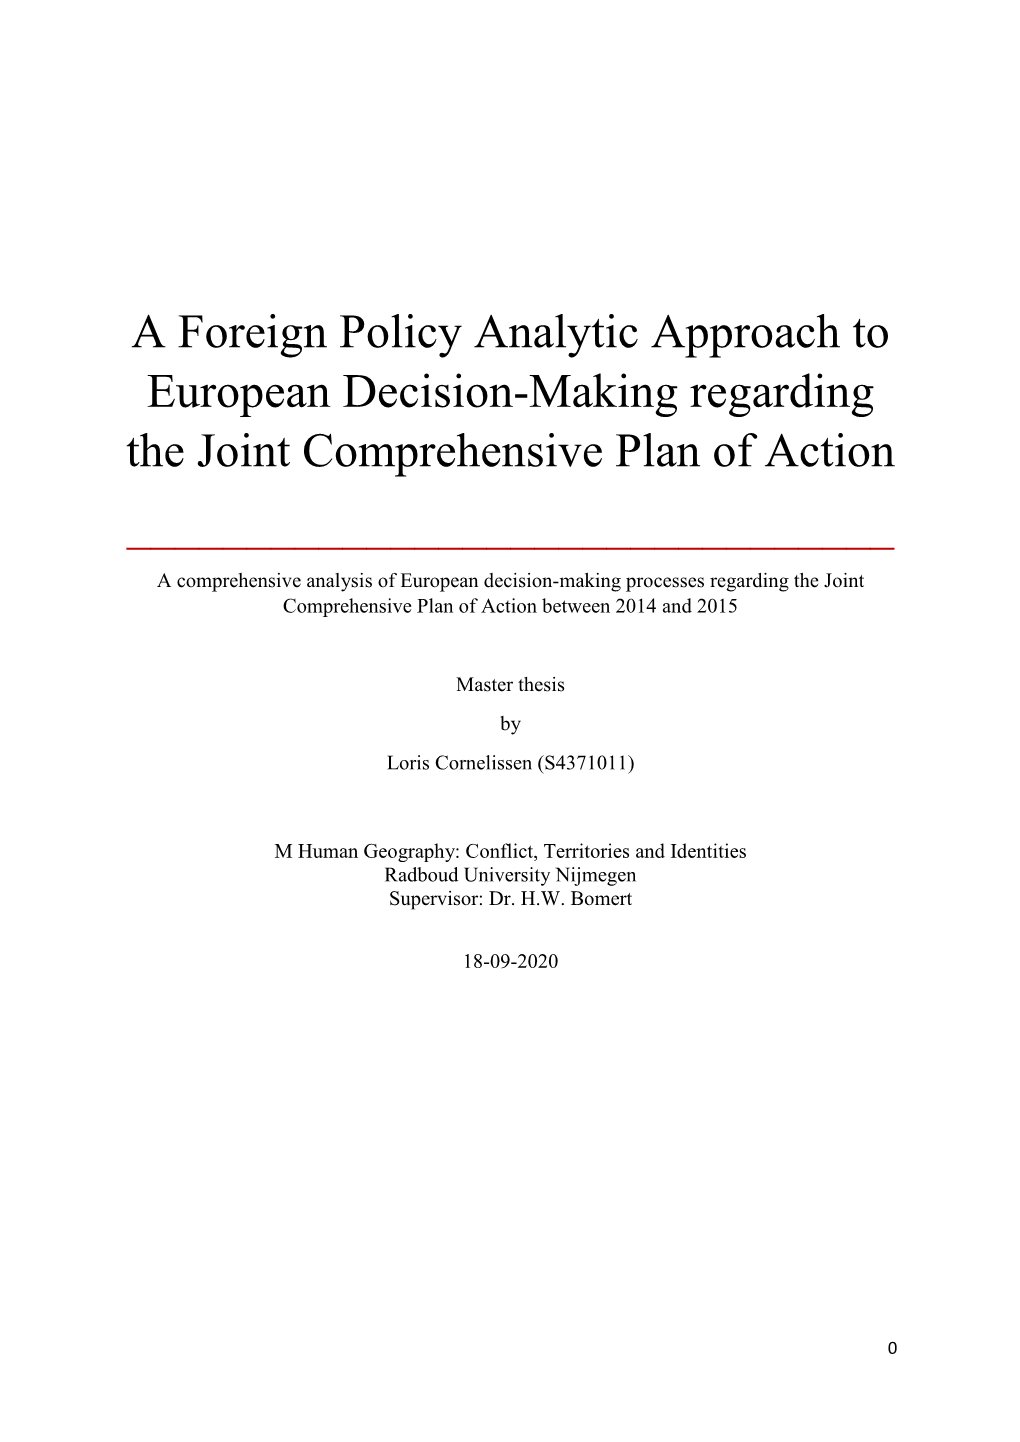 A Foreign Policy Analytic Approach to European Decision-Making